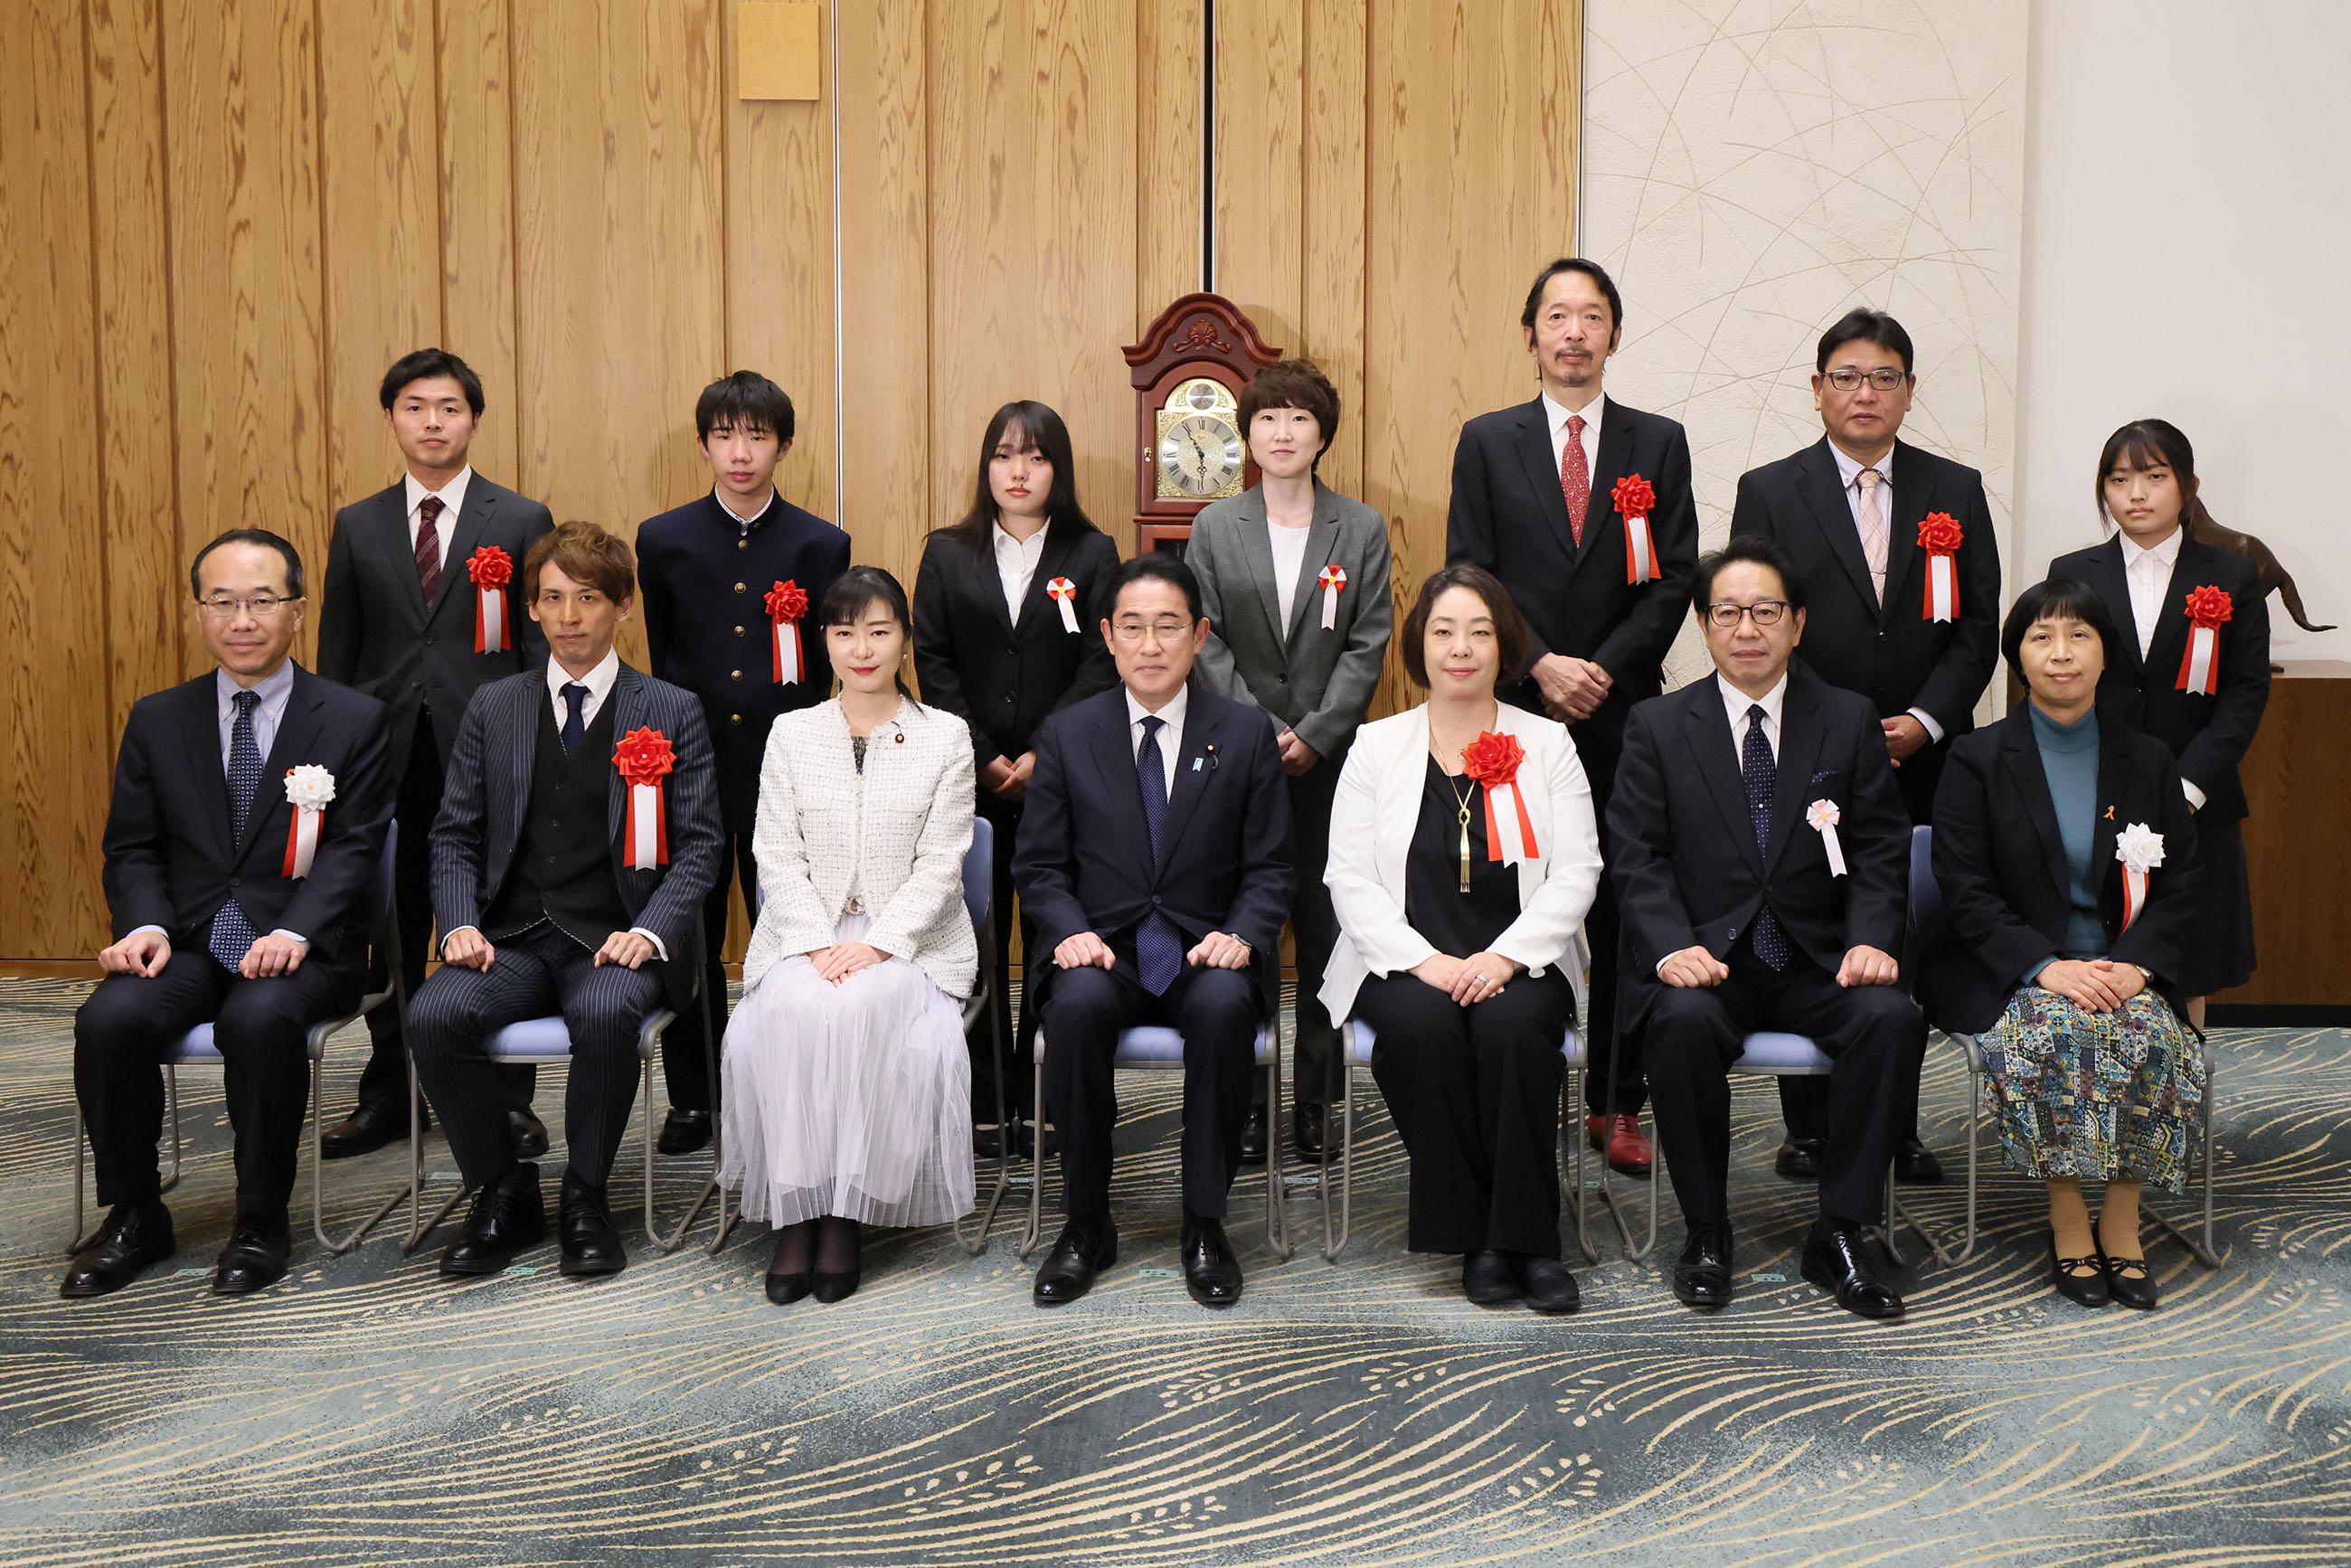 Commemorative photo session with the award recipients